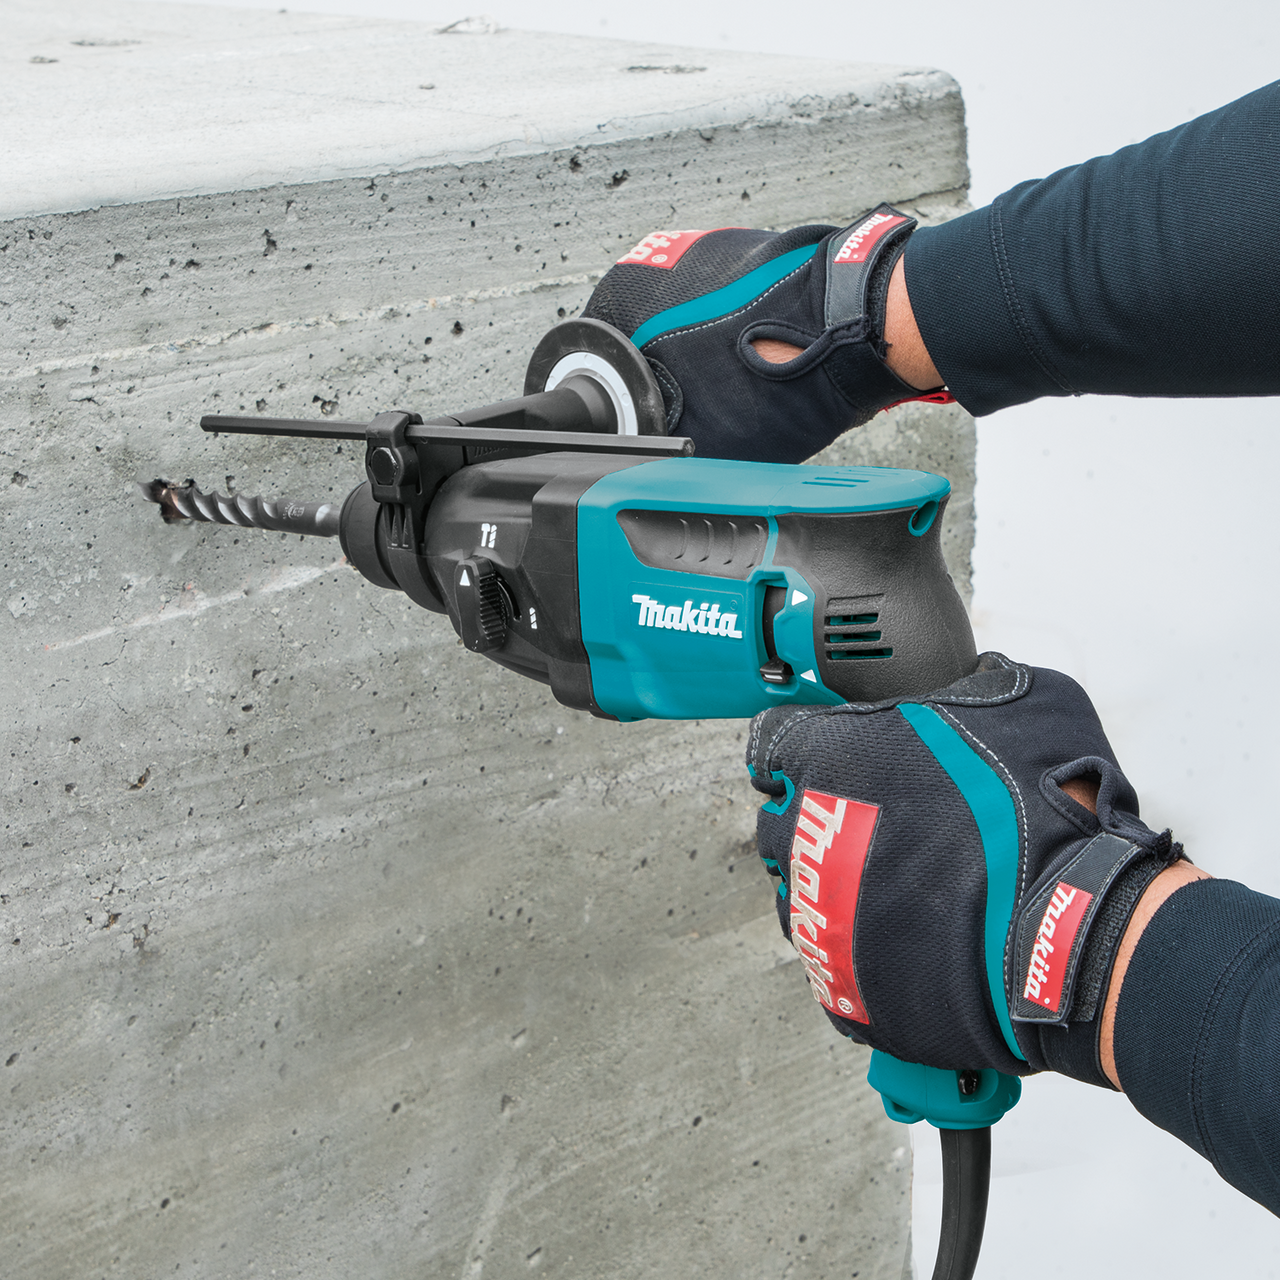 11/16" Rotary Hammer, accepts SDS-PLUS bits, HR1840